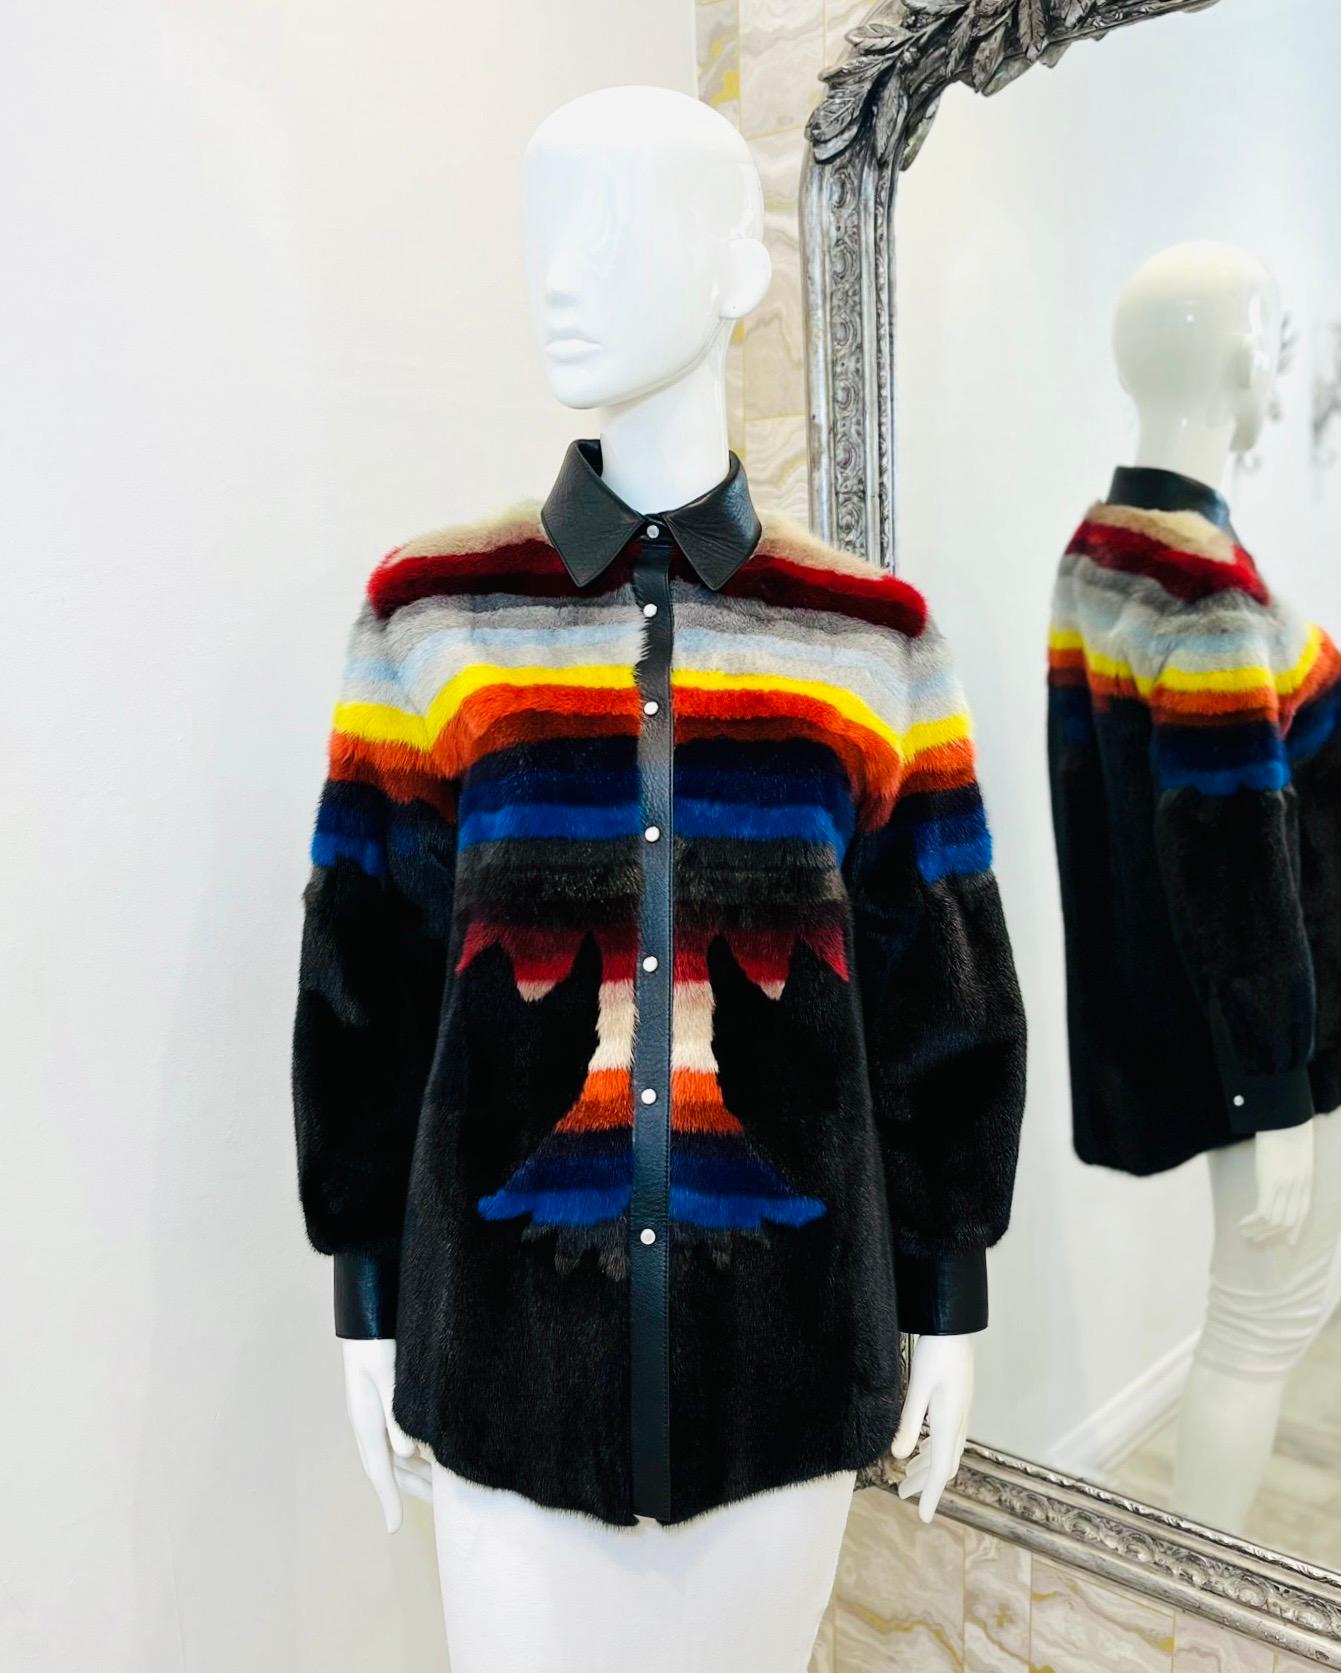 Rare Item - Christian Dior Palm Tree Mink Fur Shirt/Jacket

Black sheared mink fur with a Palm tree design the the front and multicoloured stripe pattern that wraps around the top and sleeves

Detailed with lambskin leather collar, cuffs and centre